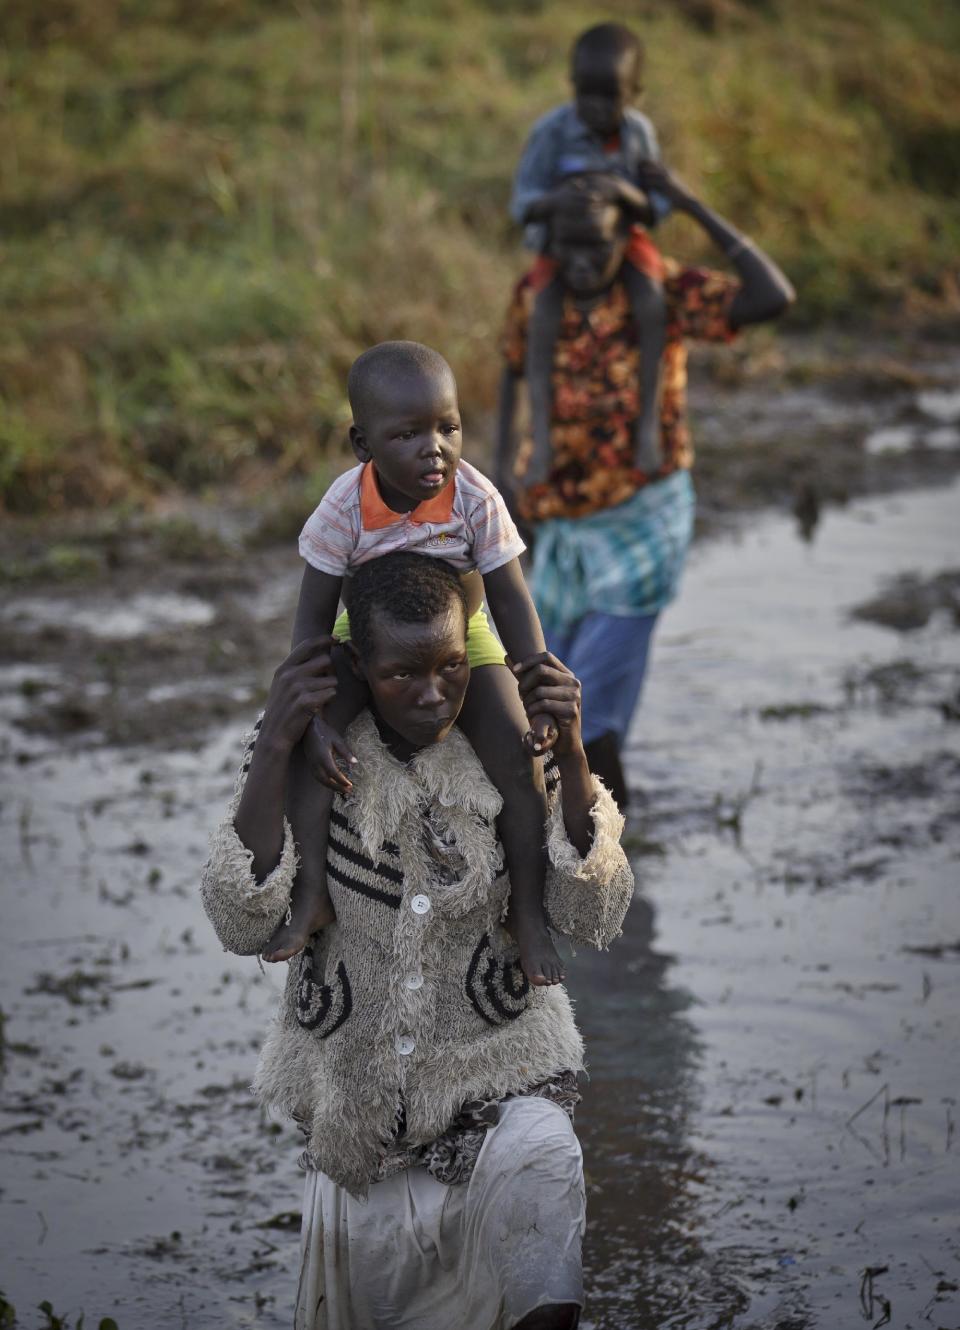 Displaced people wade through mud as they get off a river barge from Bor, some of the thousands who fled the recent fighting between government and rebel forces in Bor by boat across the White Nile, in the town of Awerial, South Sudan Thursday, Jan. 2, 2014. The international Red Cross said Wednesday that the road from Bor to the nearby Awerial area "is lined with thousands of people" waiting for boats so they could cross the Nile River and that the gathering of displaced is "is the largest single identified concentration of displaced people in the country so far". (AP Photo/Ben Curtis)